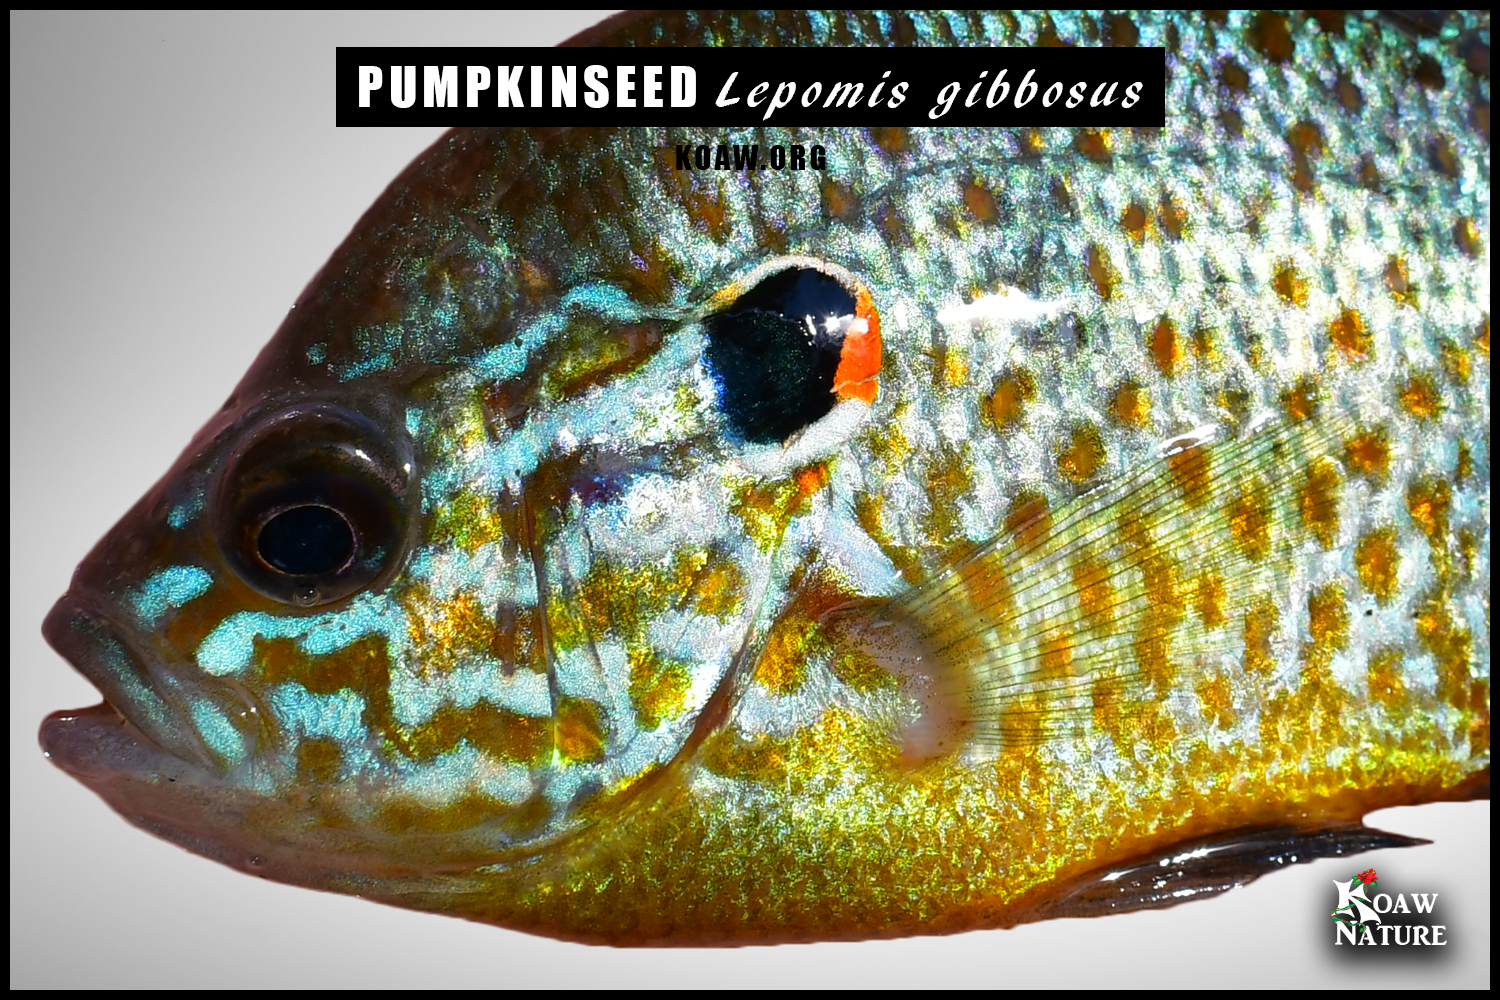 Pumpkinseed 9p25 in hand Koaw Nature.png